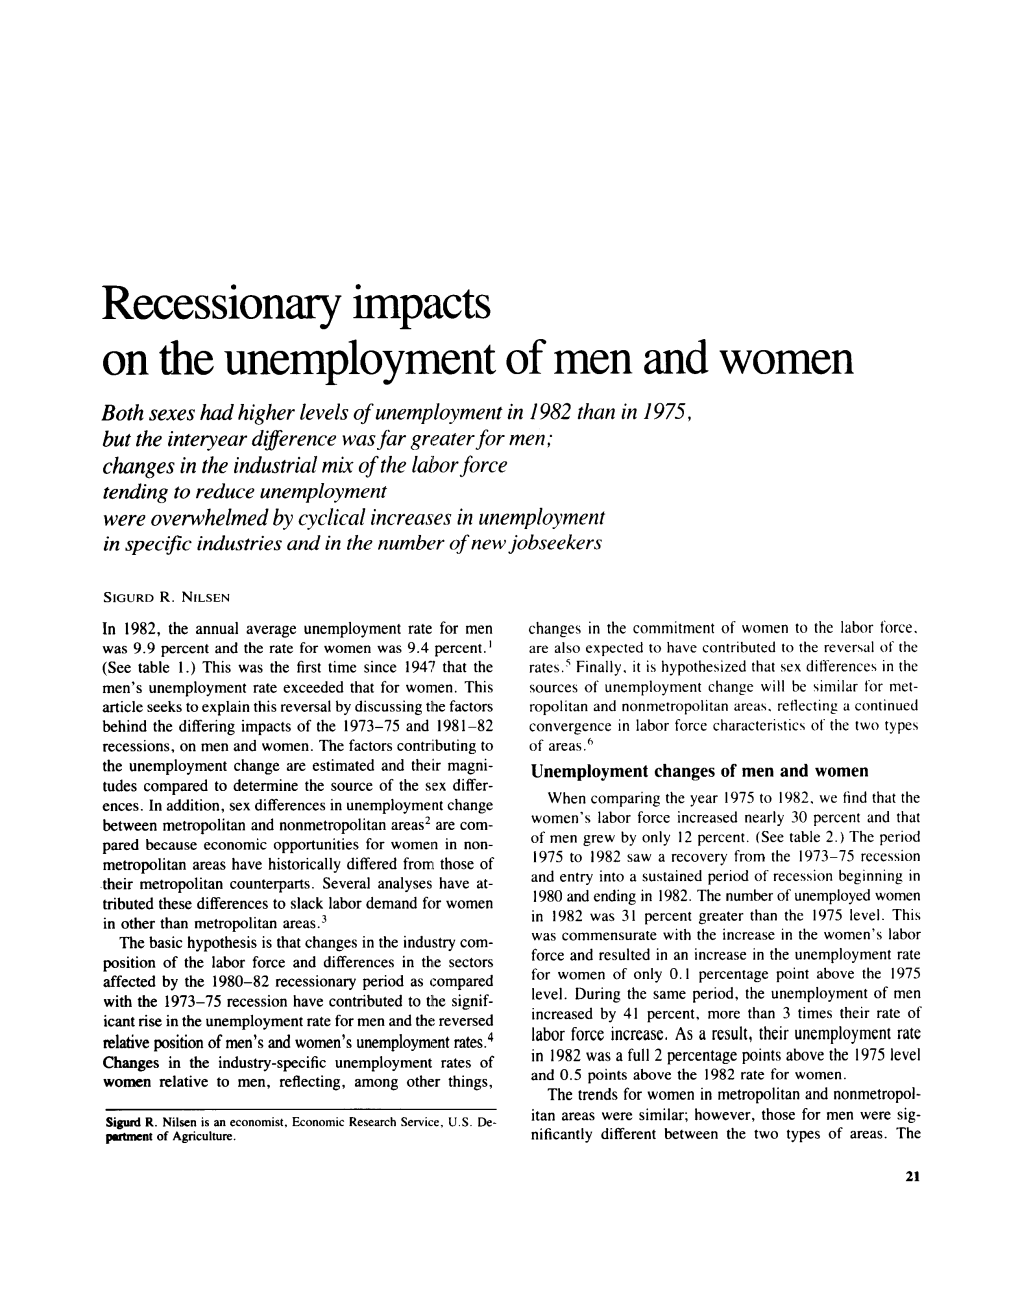 Recessionary Impacts on the Unemployment of Men and Women